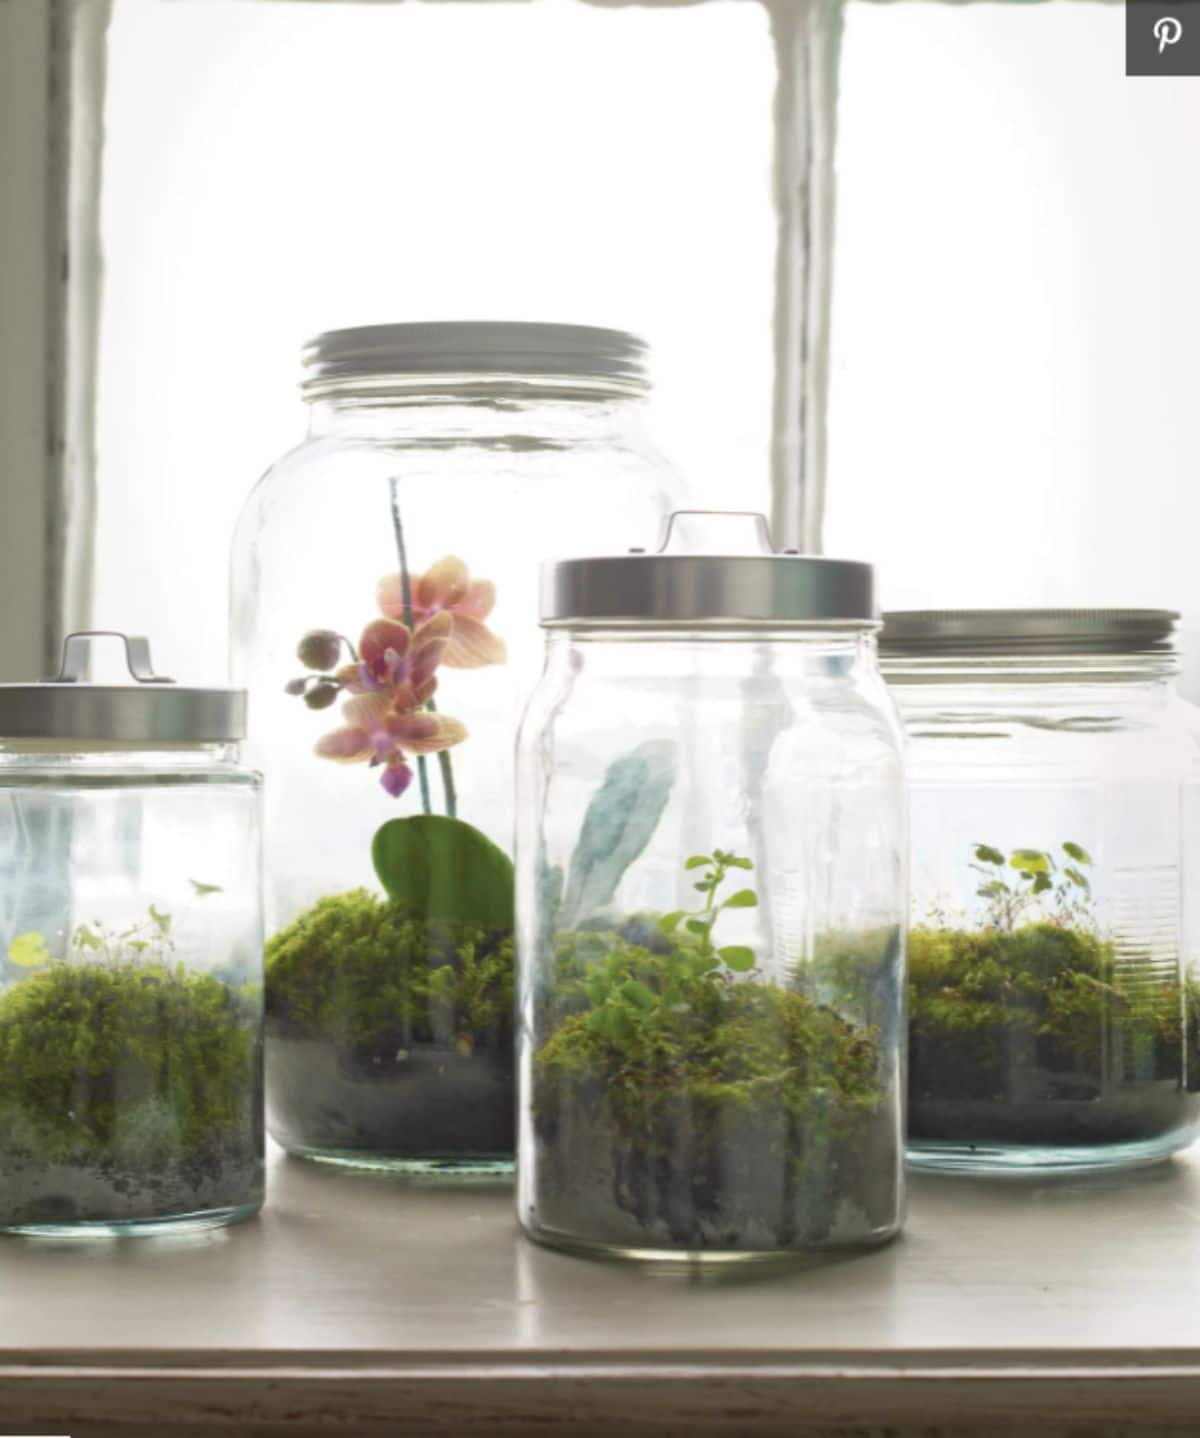 4 glass terarriums sit on a shelf. They are half filled with moss and flowers